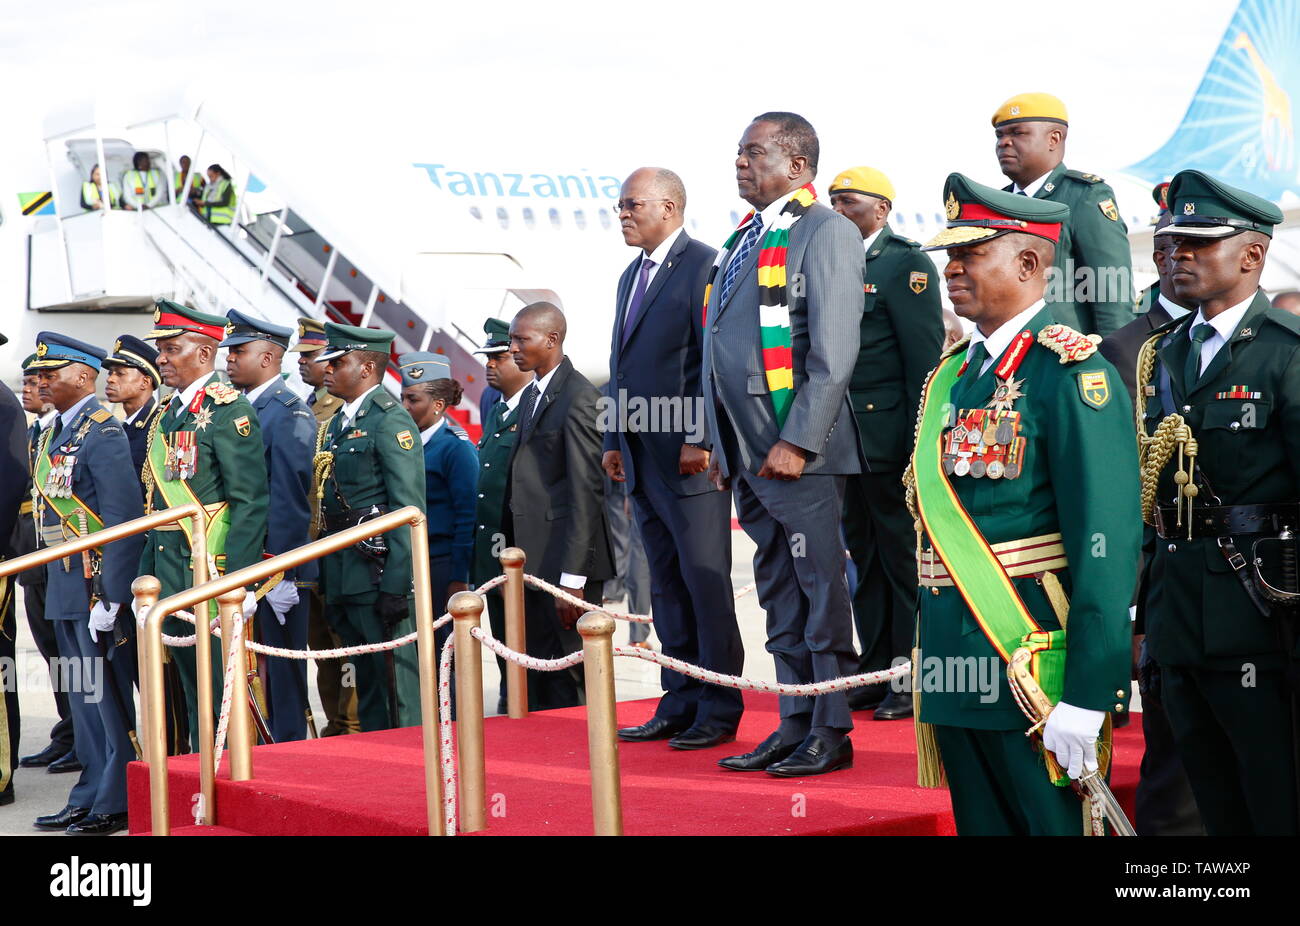 Harare, Zimbabwe. 28th May, 2019. Zimbabwean President Emmerson Mnangagwa (R, Front, on stage) welcomes Tanzanian President John Magufuli (L, Front, on stage) at the Robert Gabriel Mugabe International Airport in Harare, Zimbabwe, on May 28, 2019. Visiting Tanzanian President John Magufuli arrived in Zimbabwe on Tuesday for a two-day official visit. Credit: Shaun Jusa/Xinhua/Alamy Live News Stock Photo